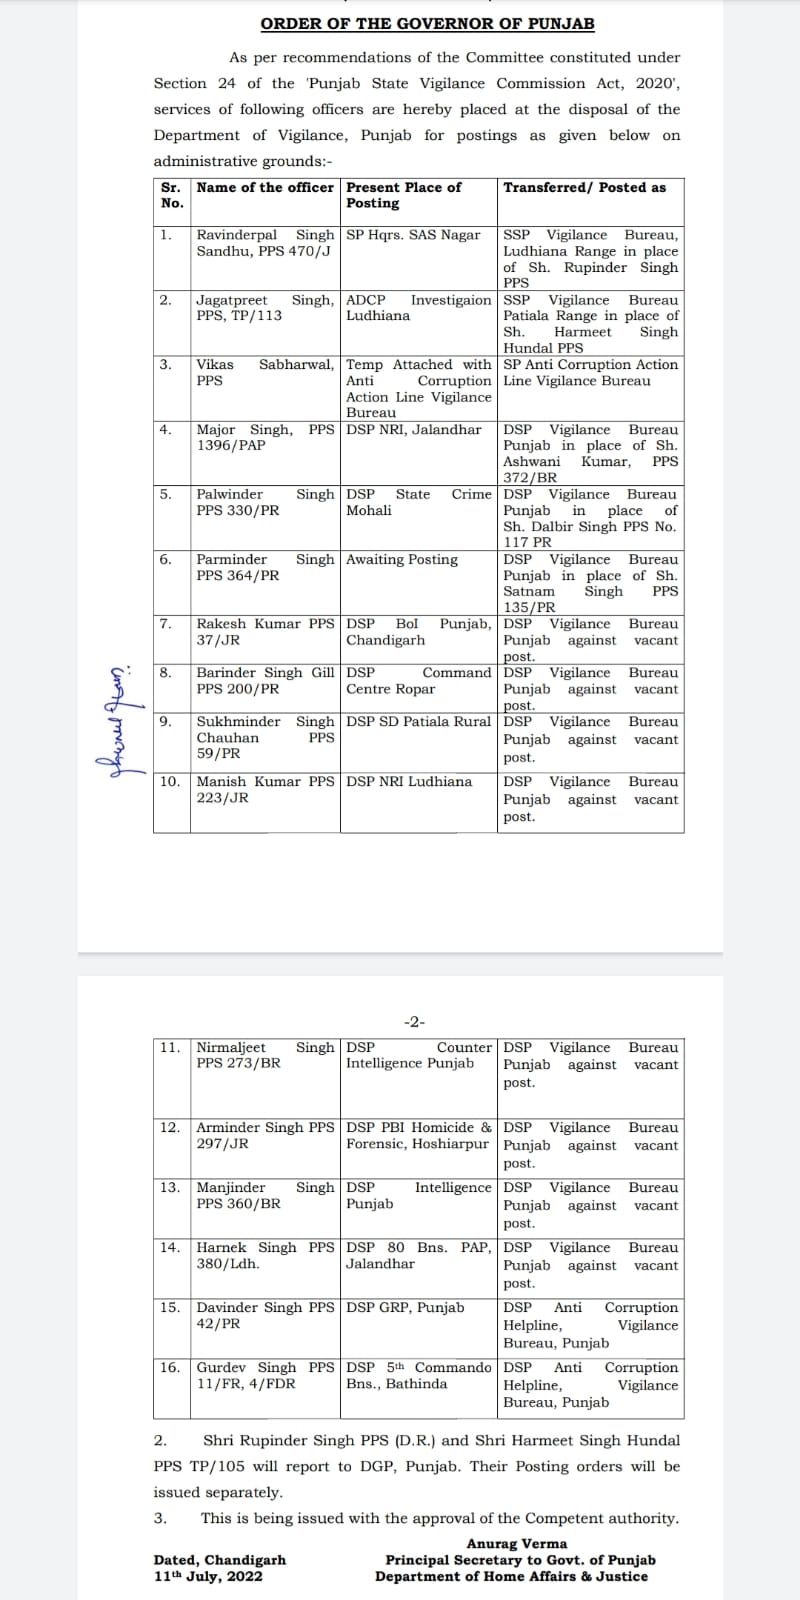 16 SSP-DSP rank officers transferred